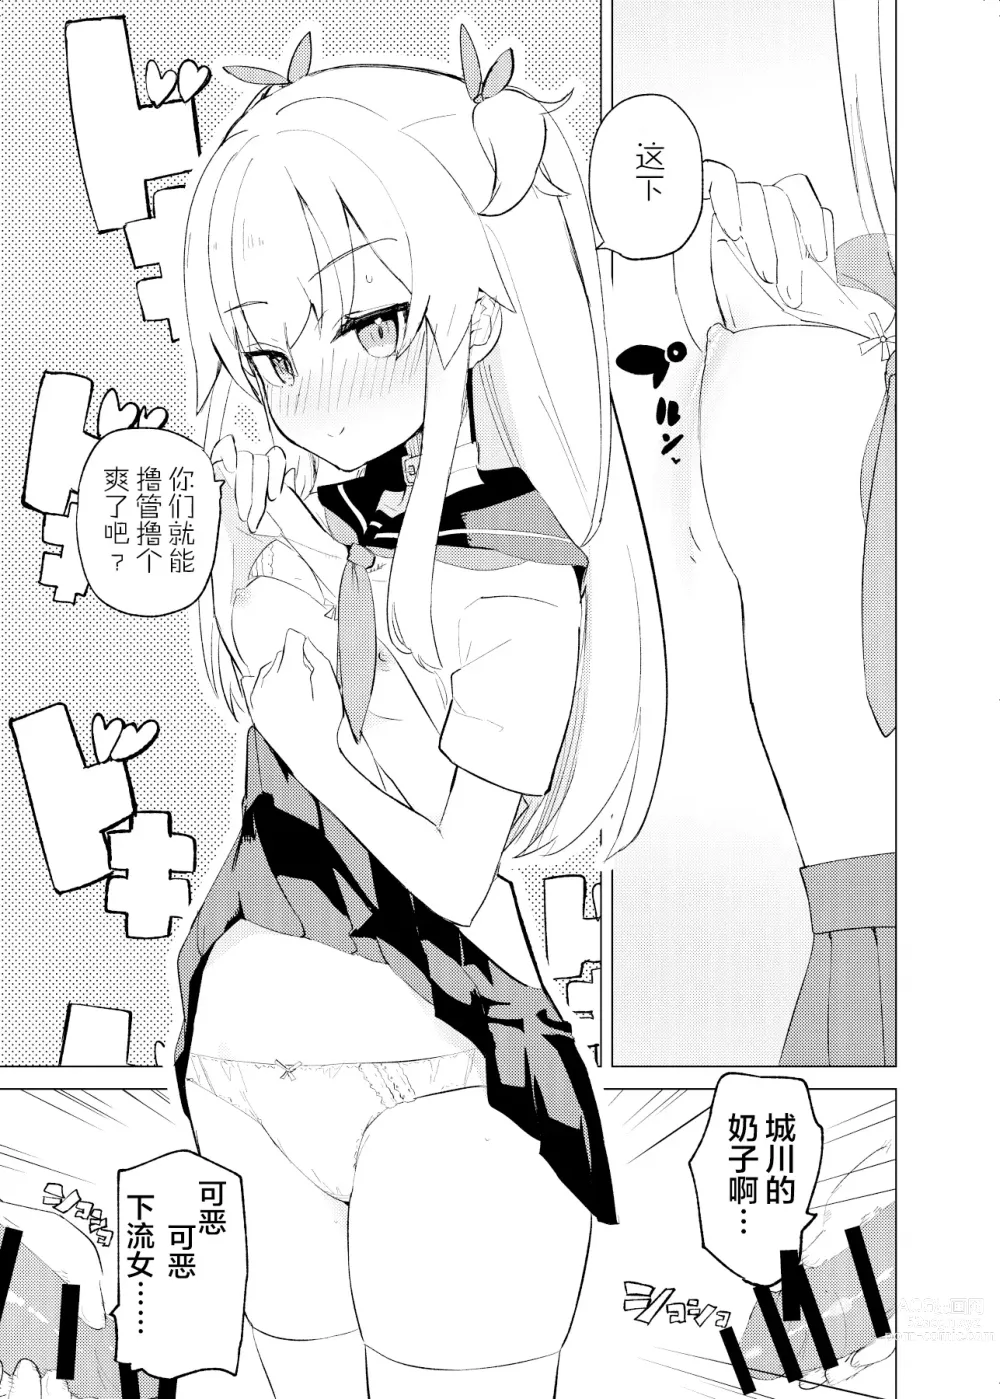 Page 8 of doujinshi S.S.S.DI2